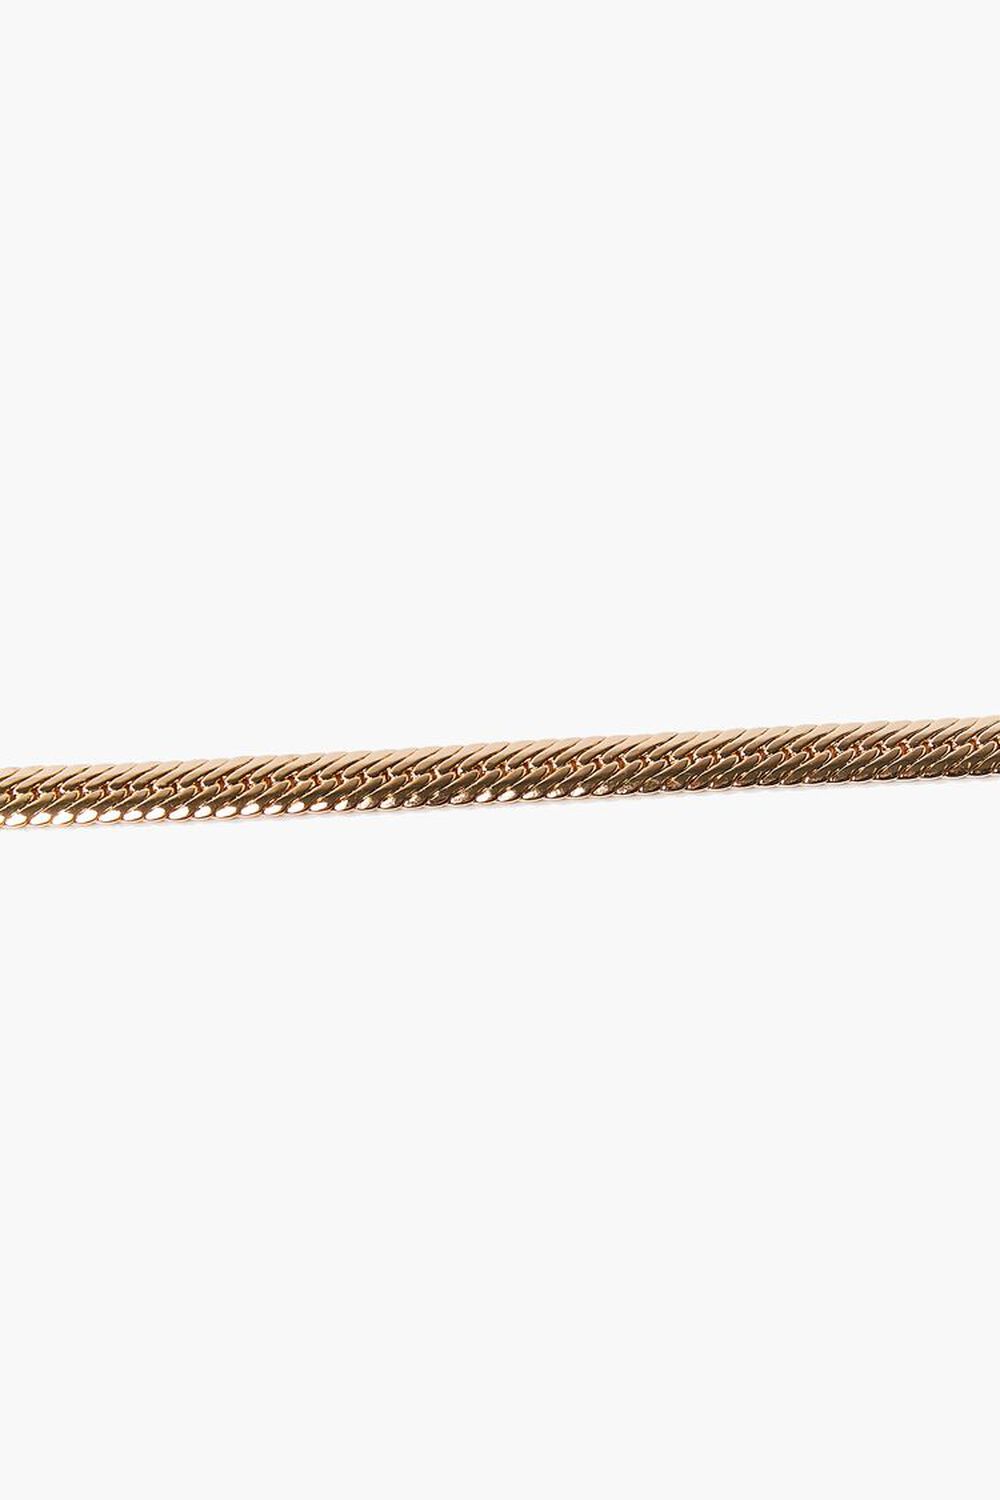 GOLD Serpentine Chain Anklet, image 1